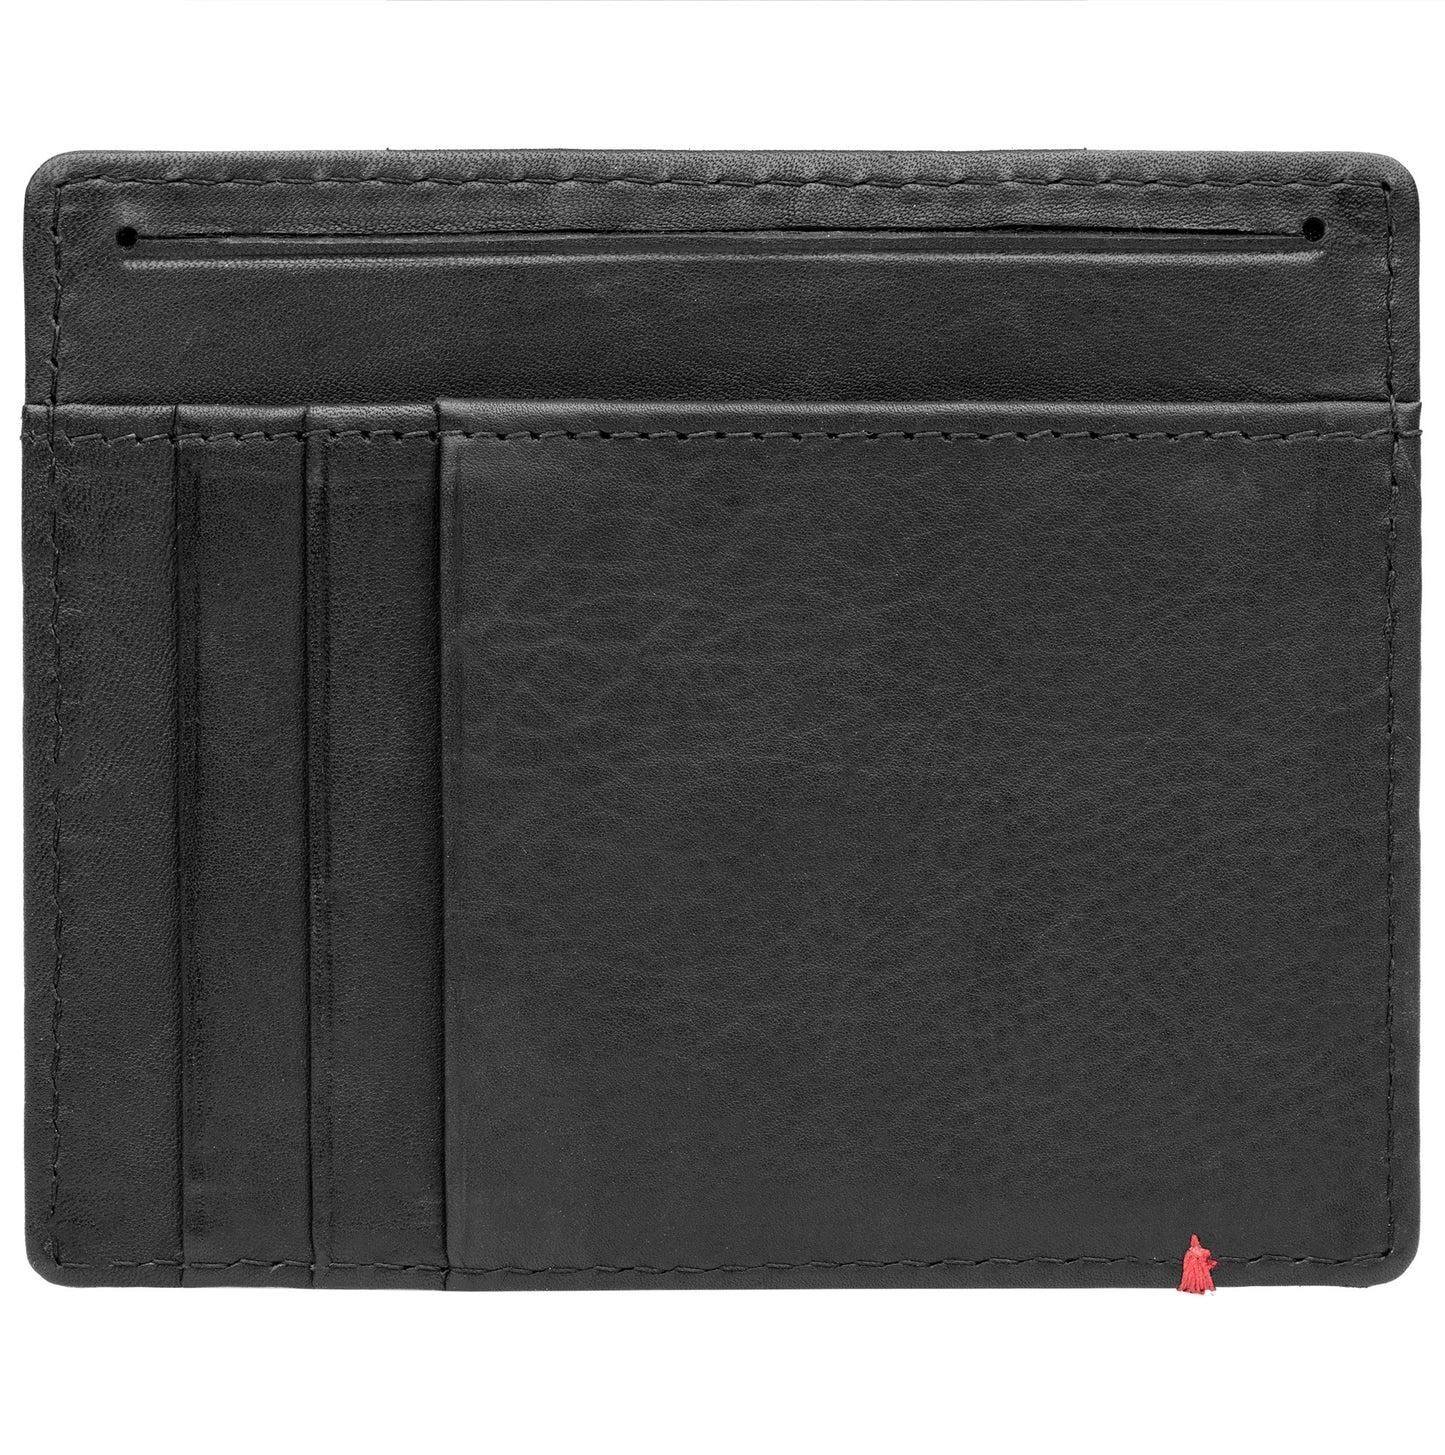 Black Leather Wallet With Zippo 1932 Metal Plate design minimalist back empty